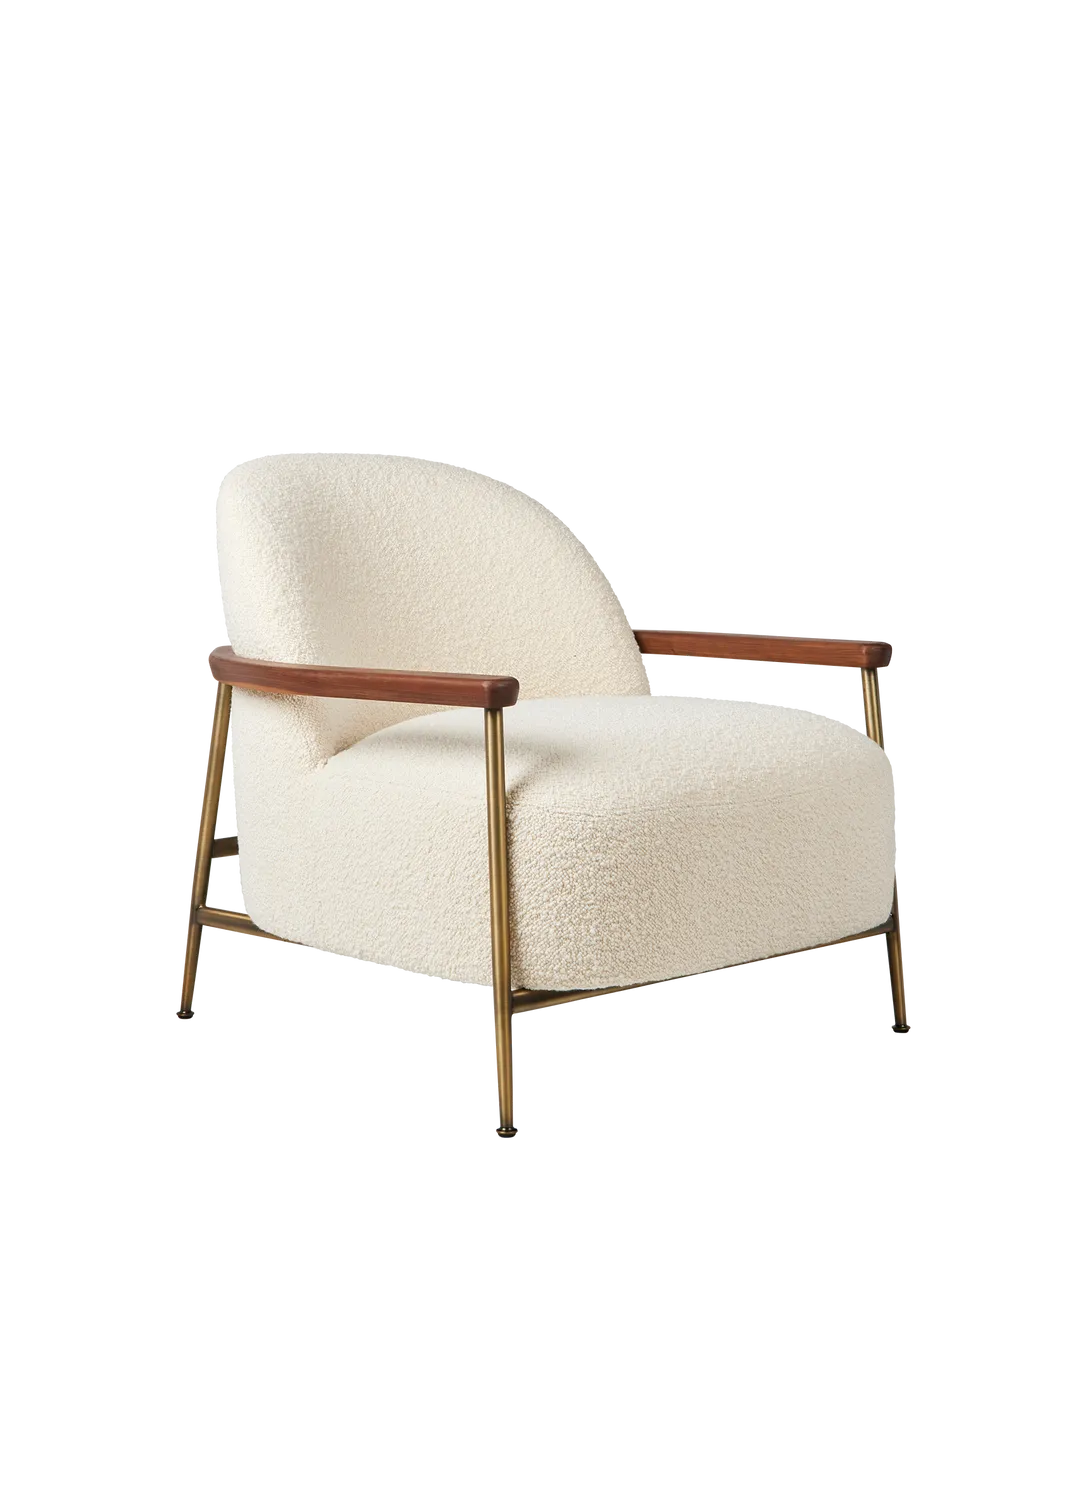 Sejour Lounge Chair with Armrest by Gubi